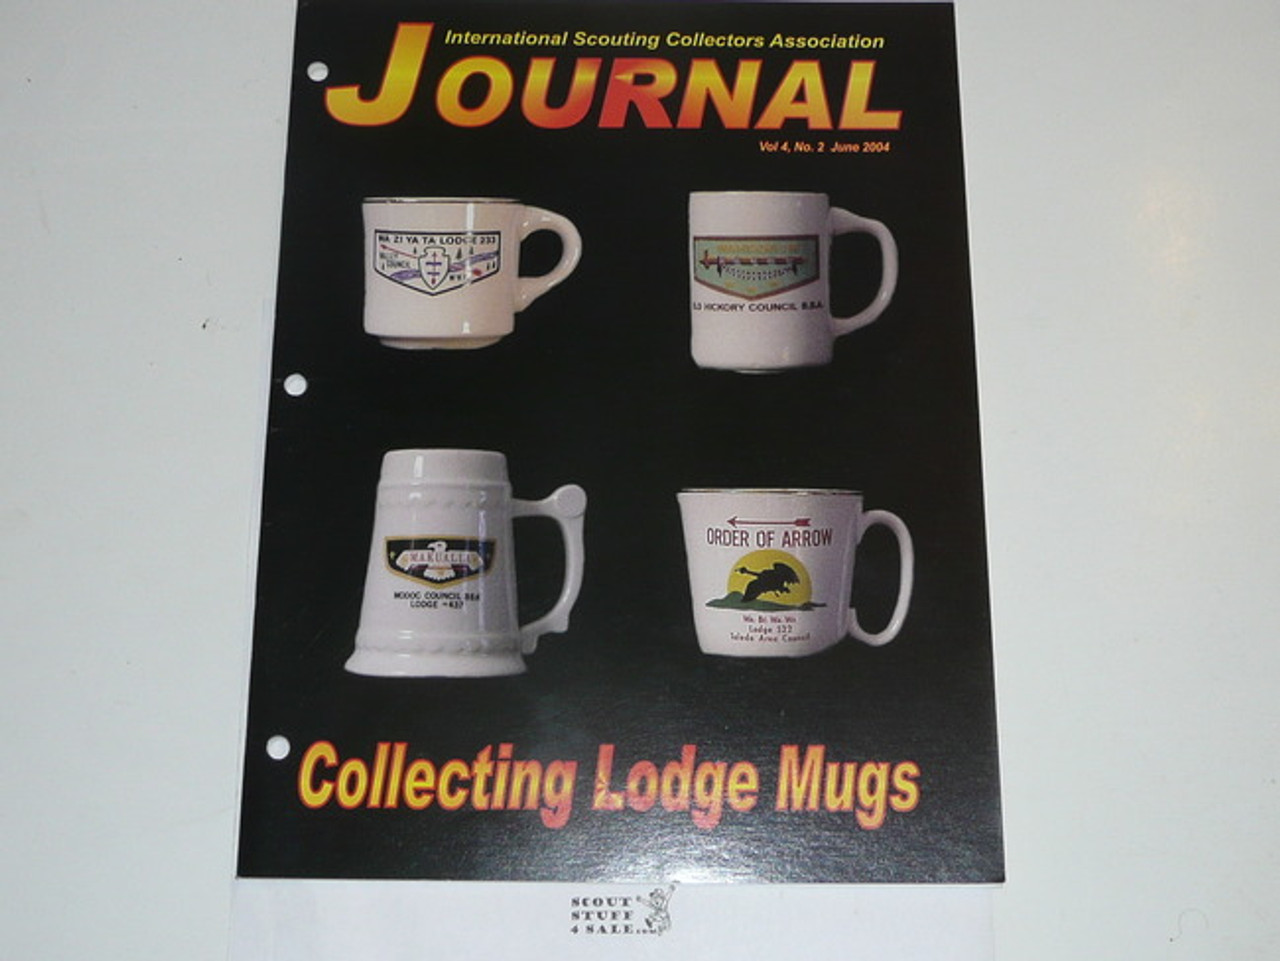 The International Scouting Collectors Association (ISCA) Journal, 2004 June, Vol 4 #2